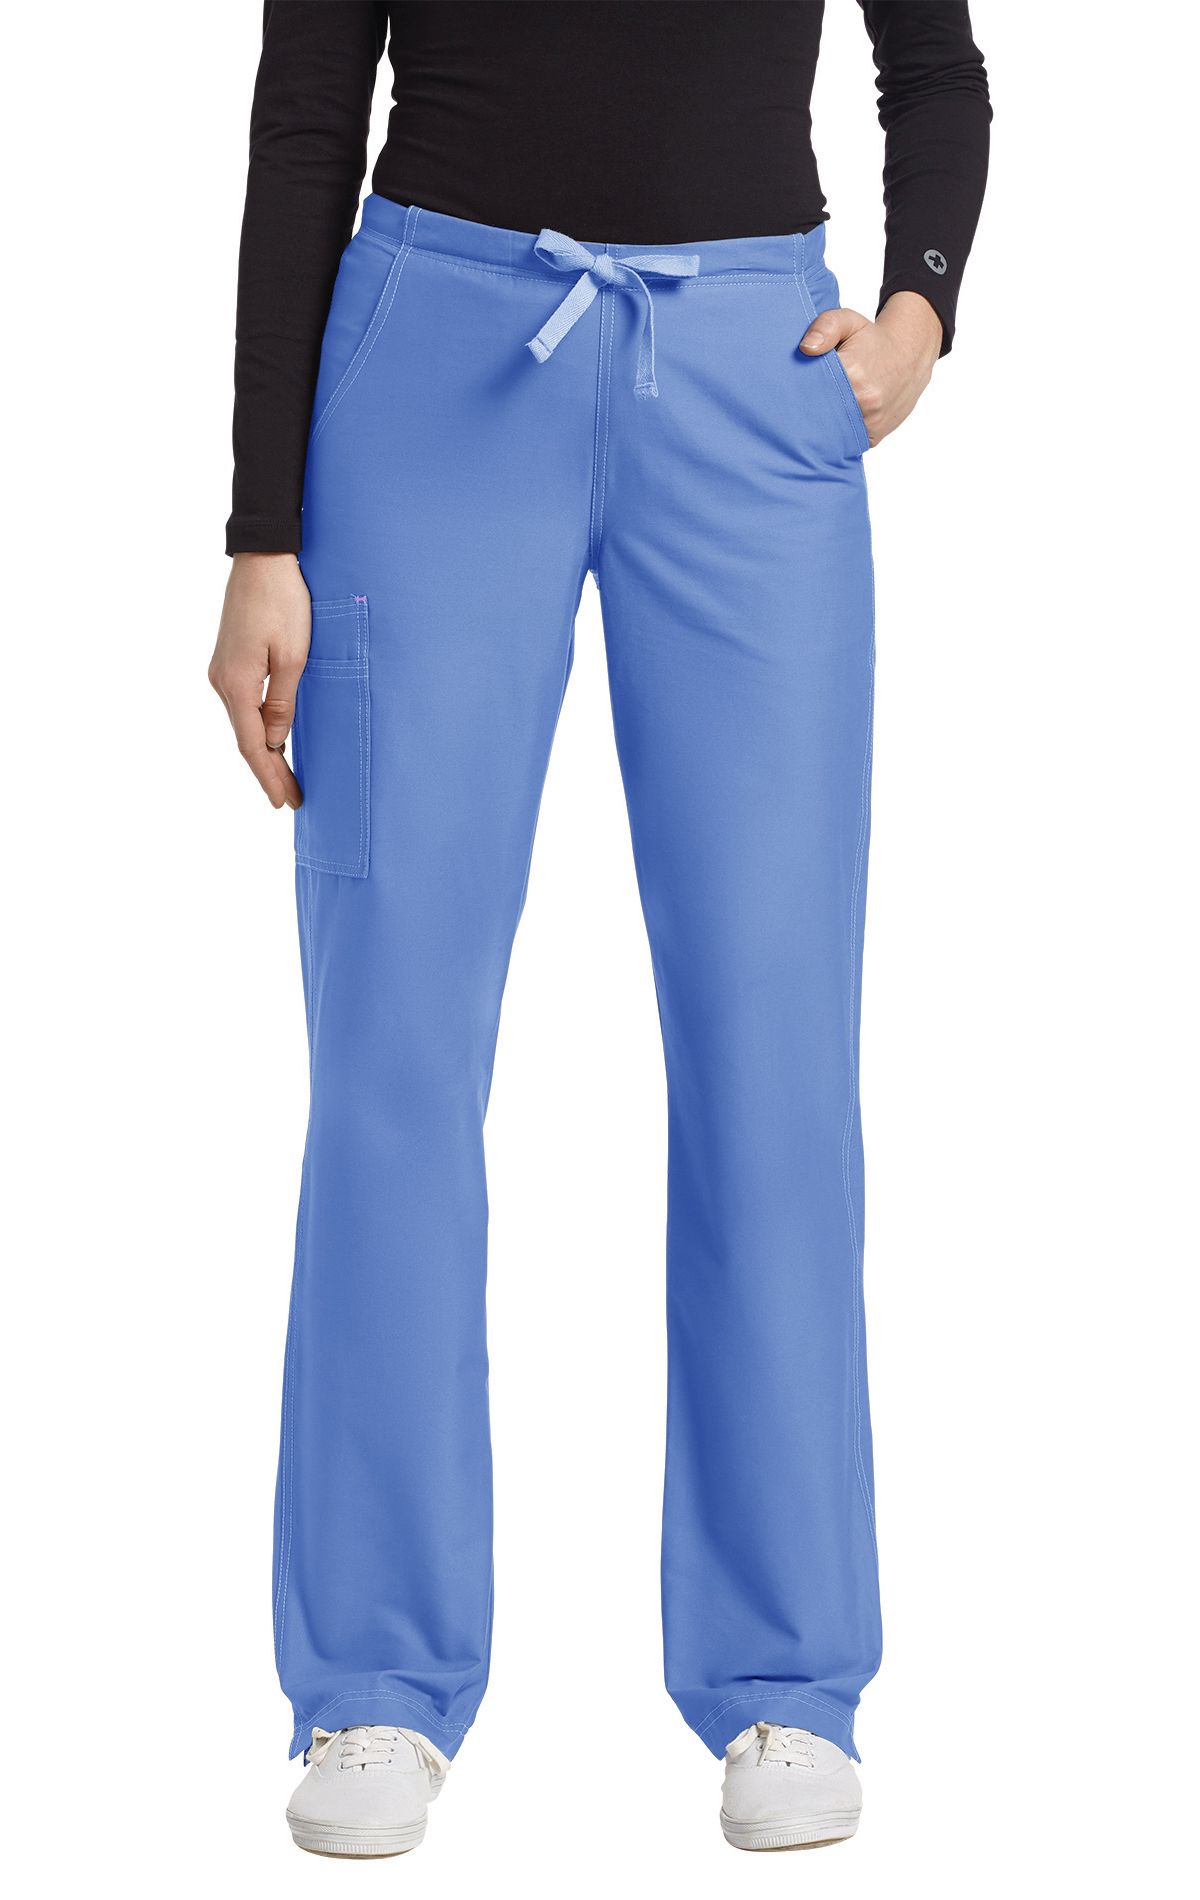 Activate by Med Couture Women's Elastic Waist Scrub Pant – Charm City Scrubs